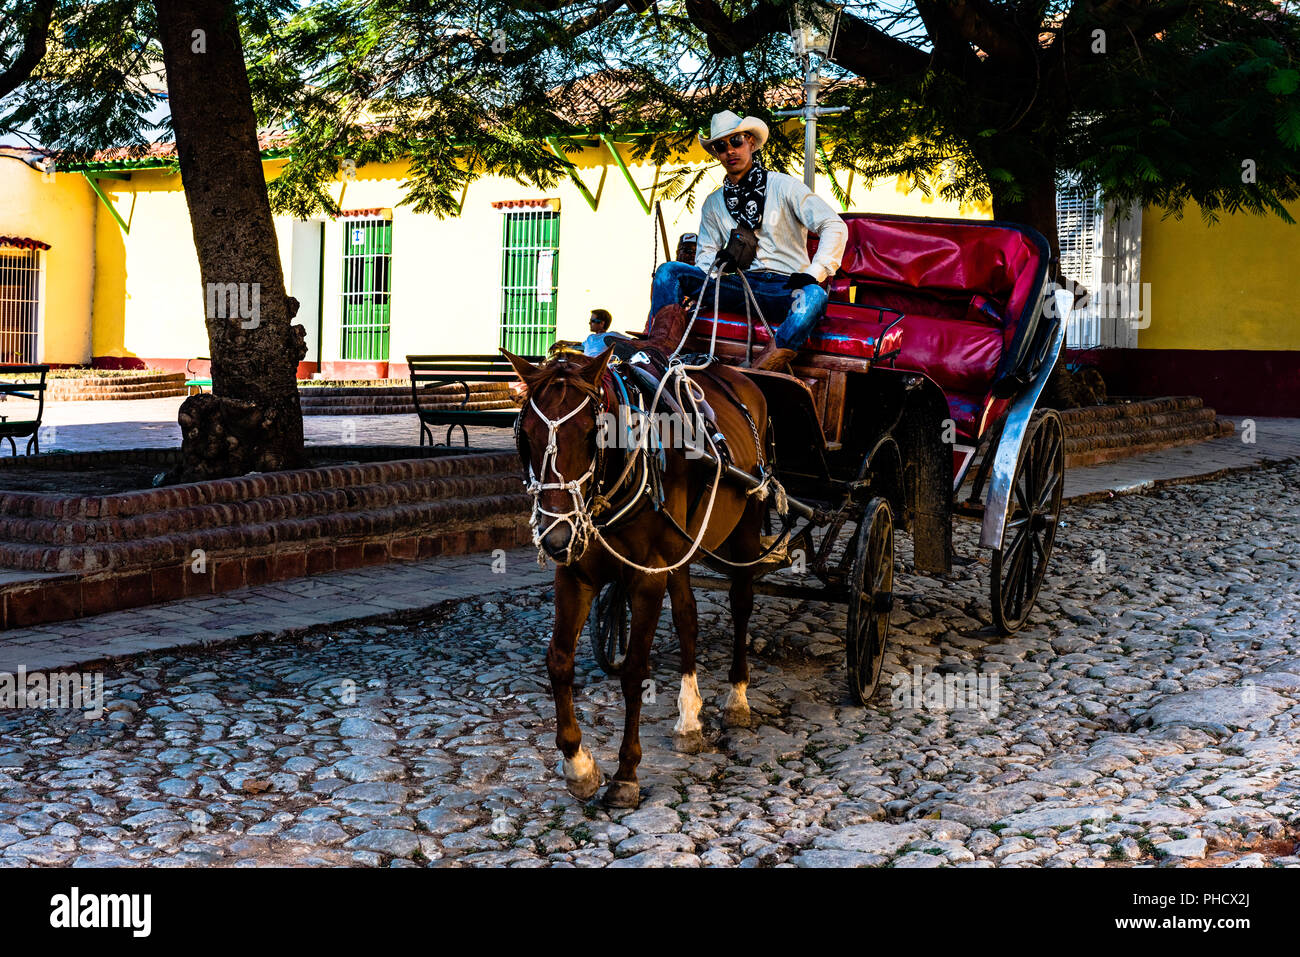 Cuban Cowboy takes the reins of horse and buggy on a cobblestone street in Trinidad, Cuba. Stock Photo